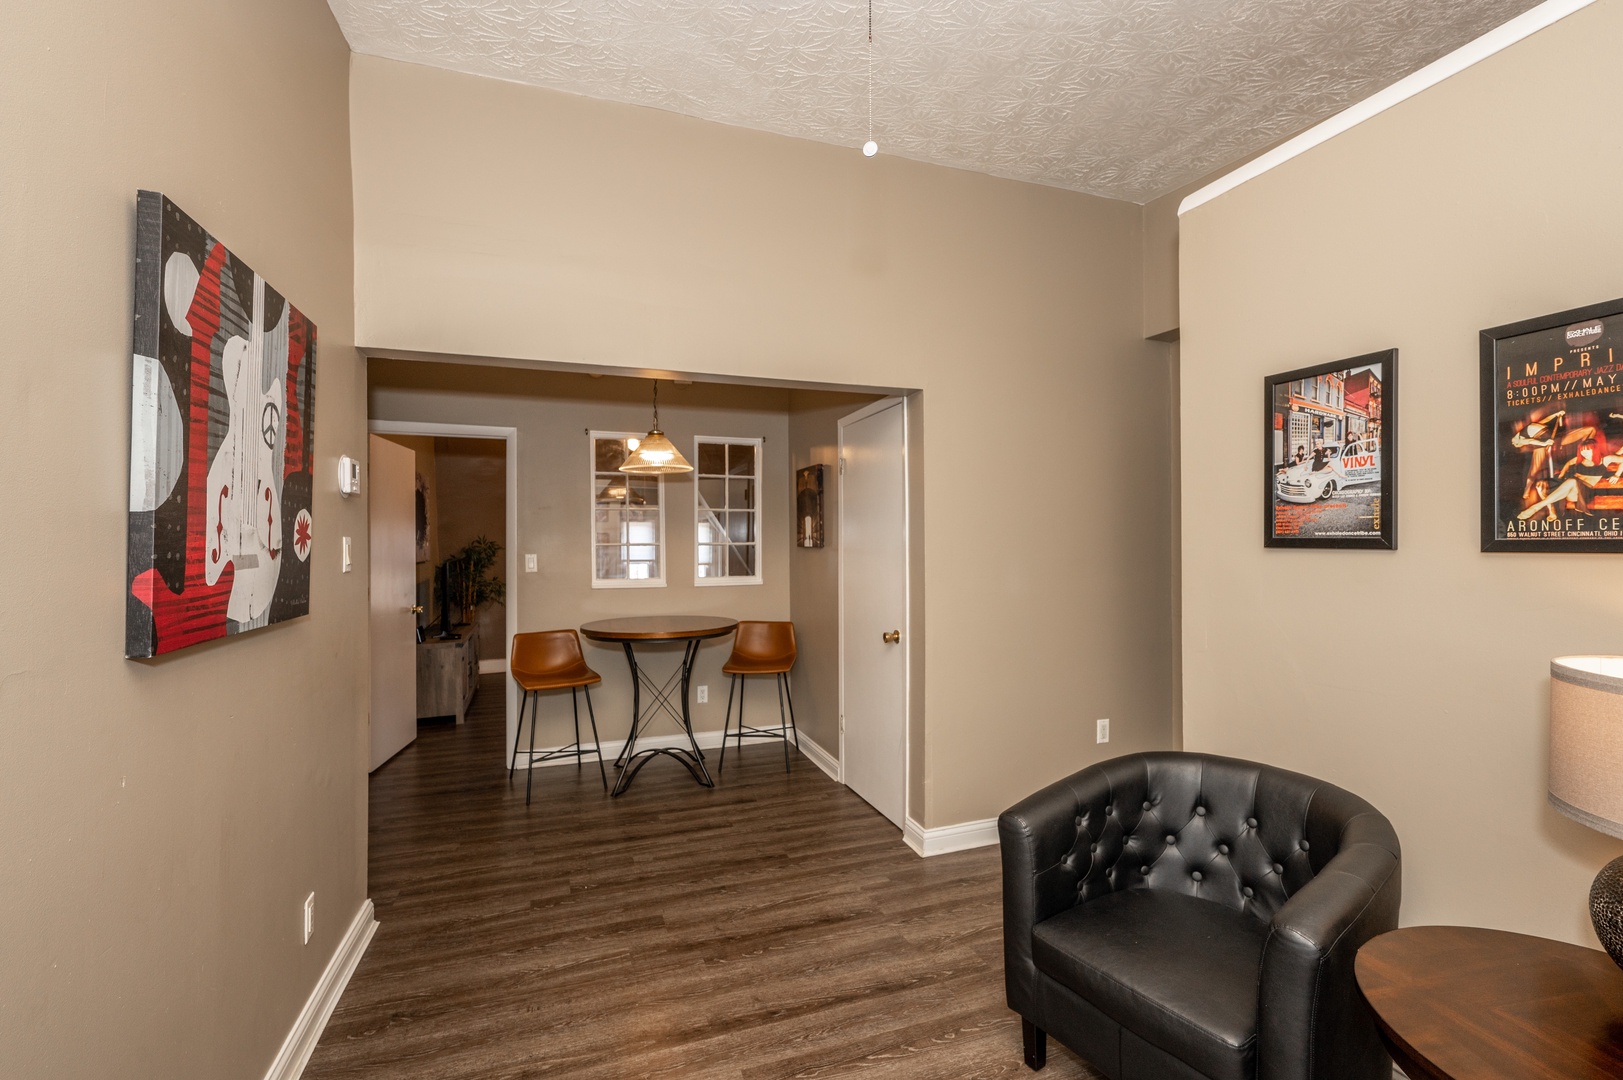 Enjoy chic finishes & comfortable lounging spots throughout this condo